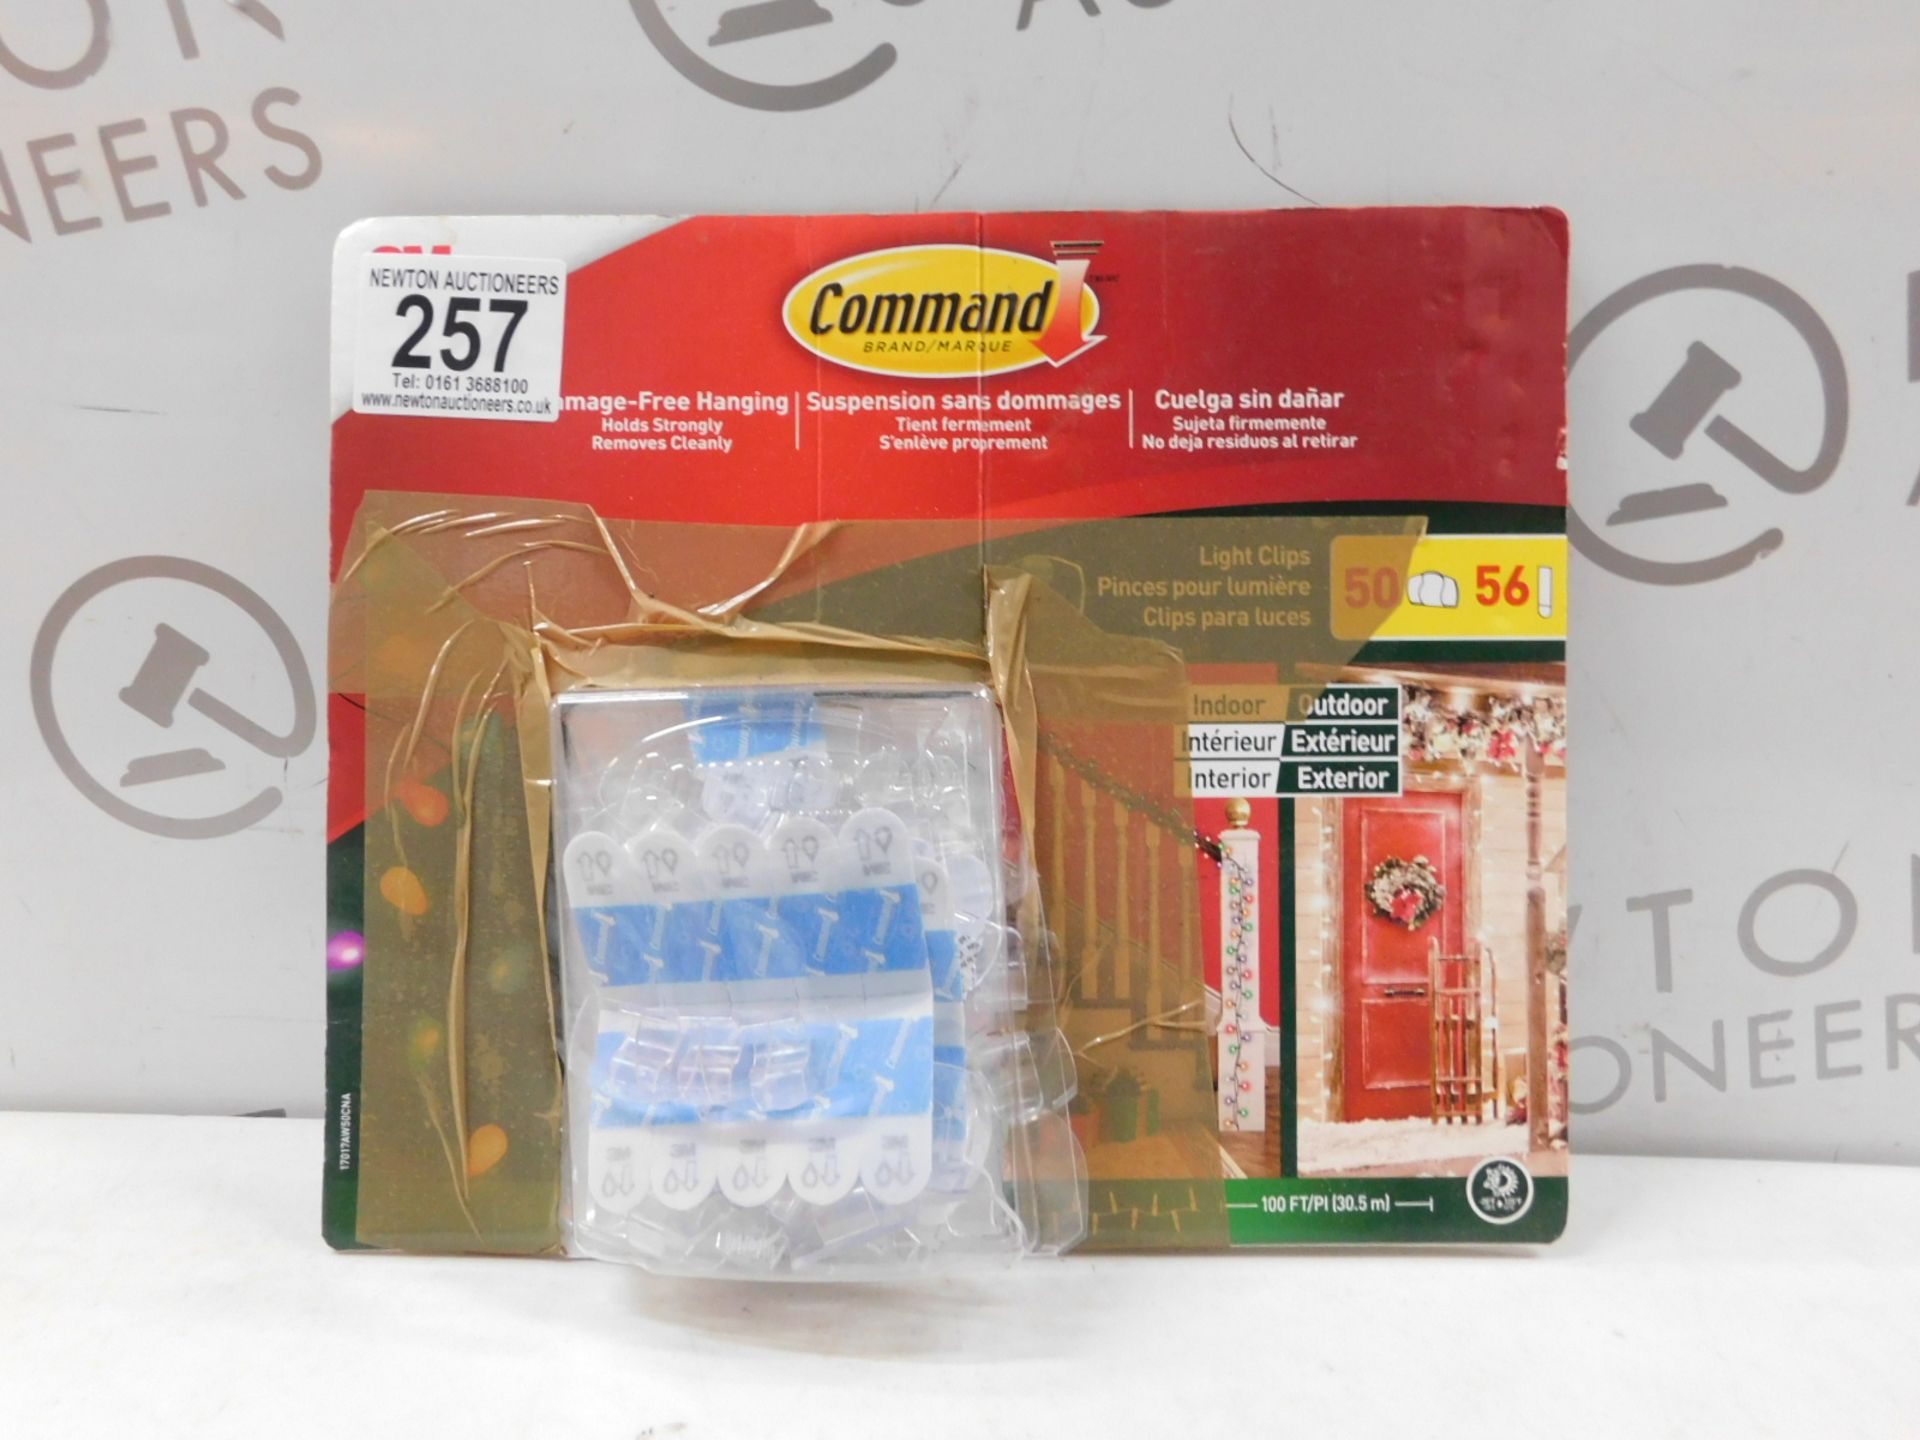 1 PACK OF COMMAND DAMAGE-FREE 50 HANGING LIGHT CLIPS RRP Â£12.99